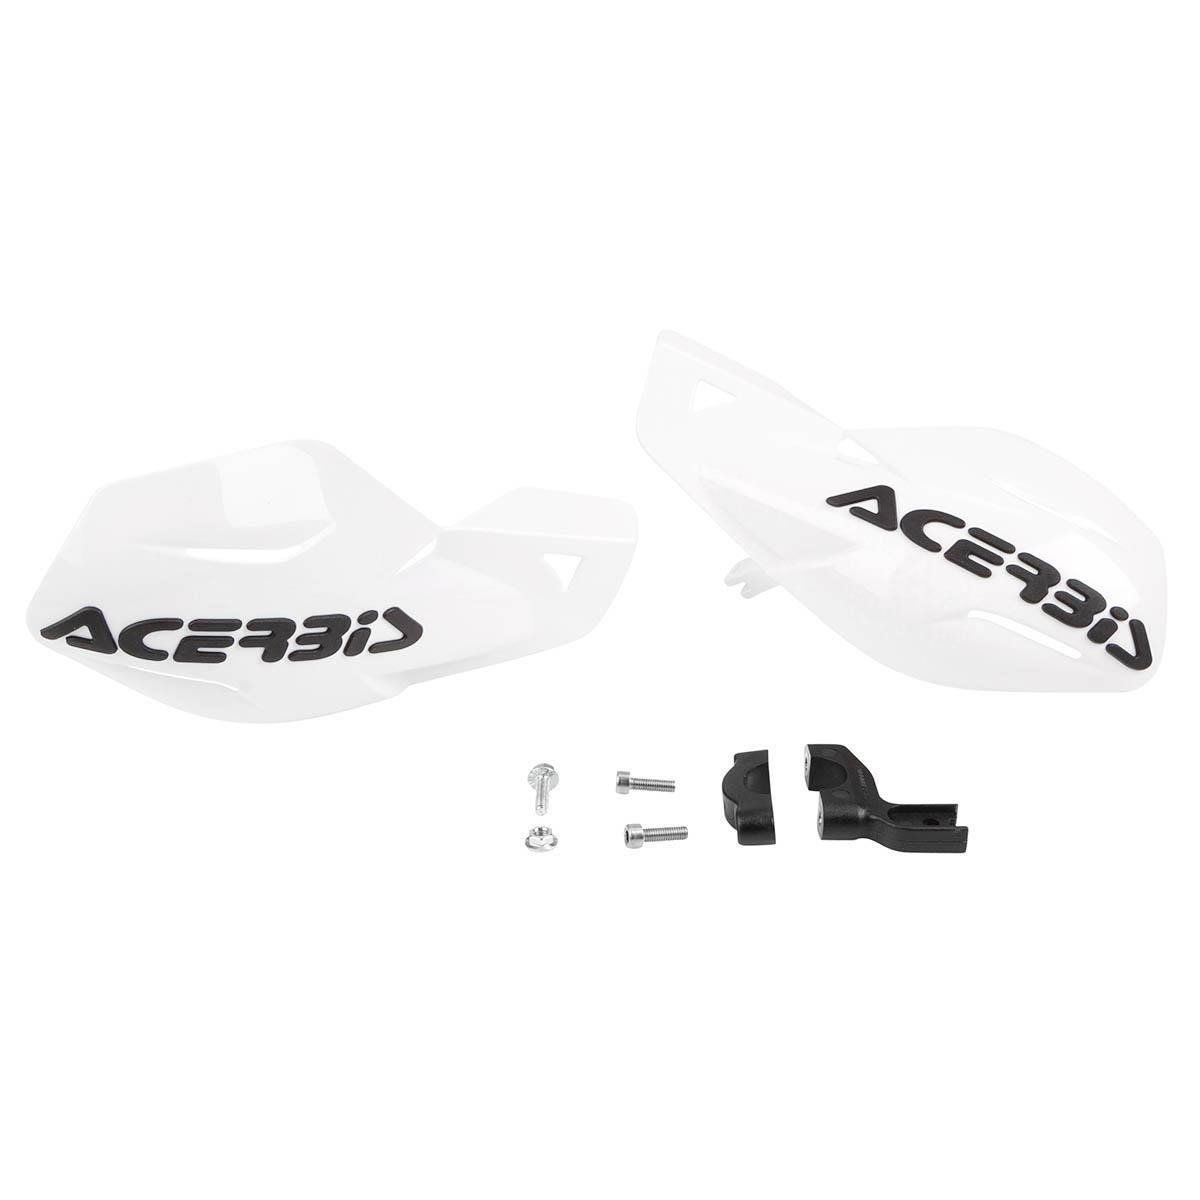 Acerbis Mx Uniko Offroad Motorcycle Hand Guards White 